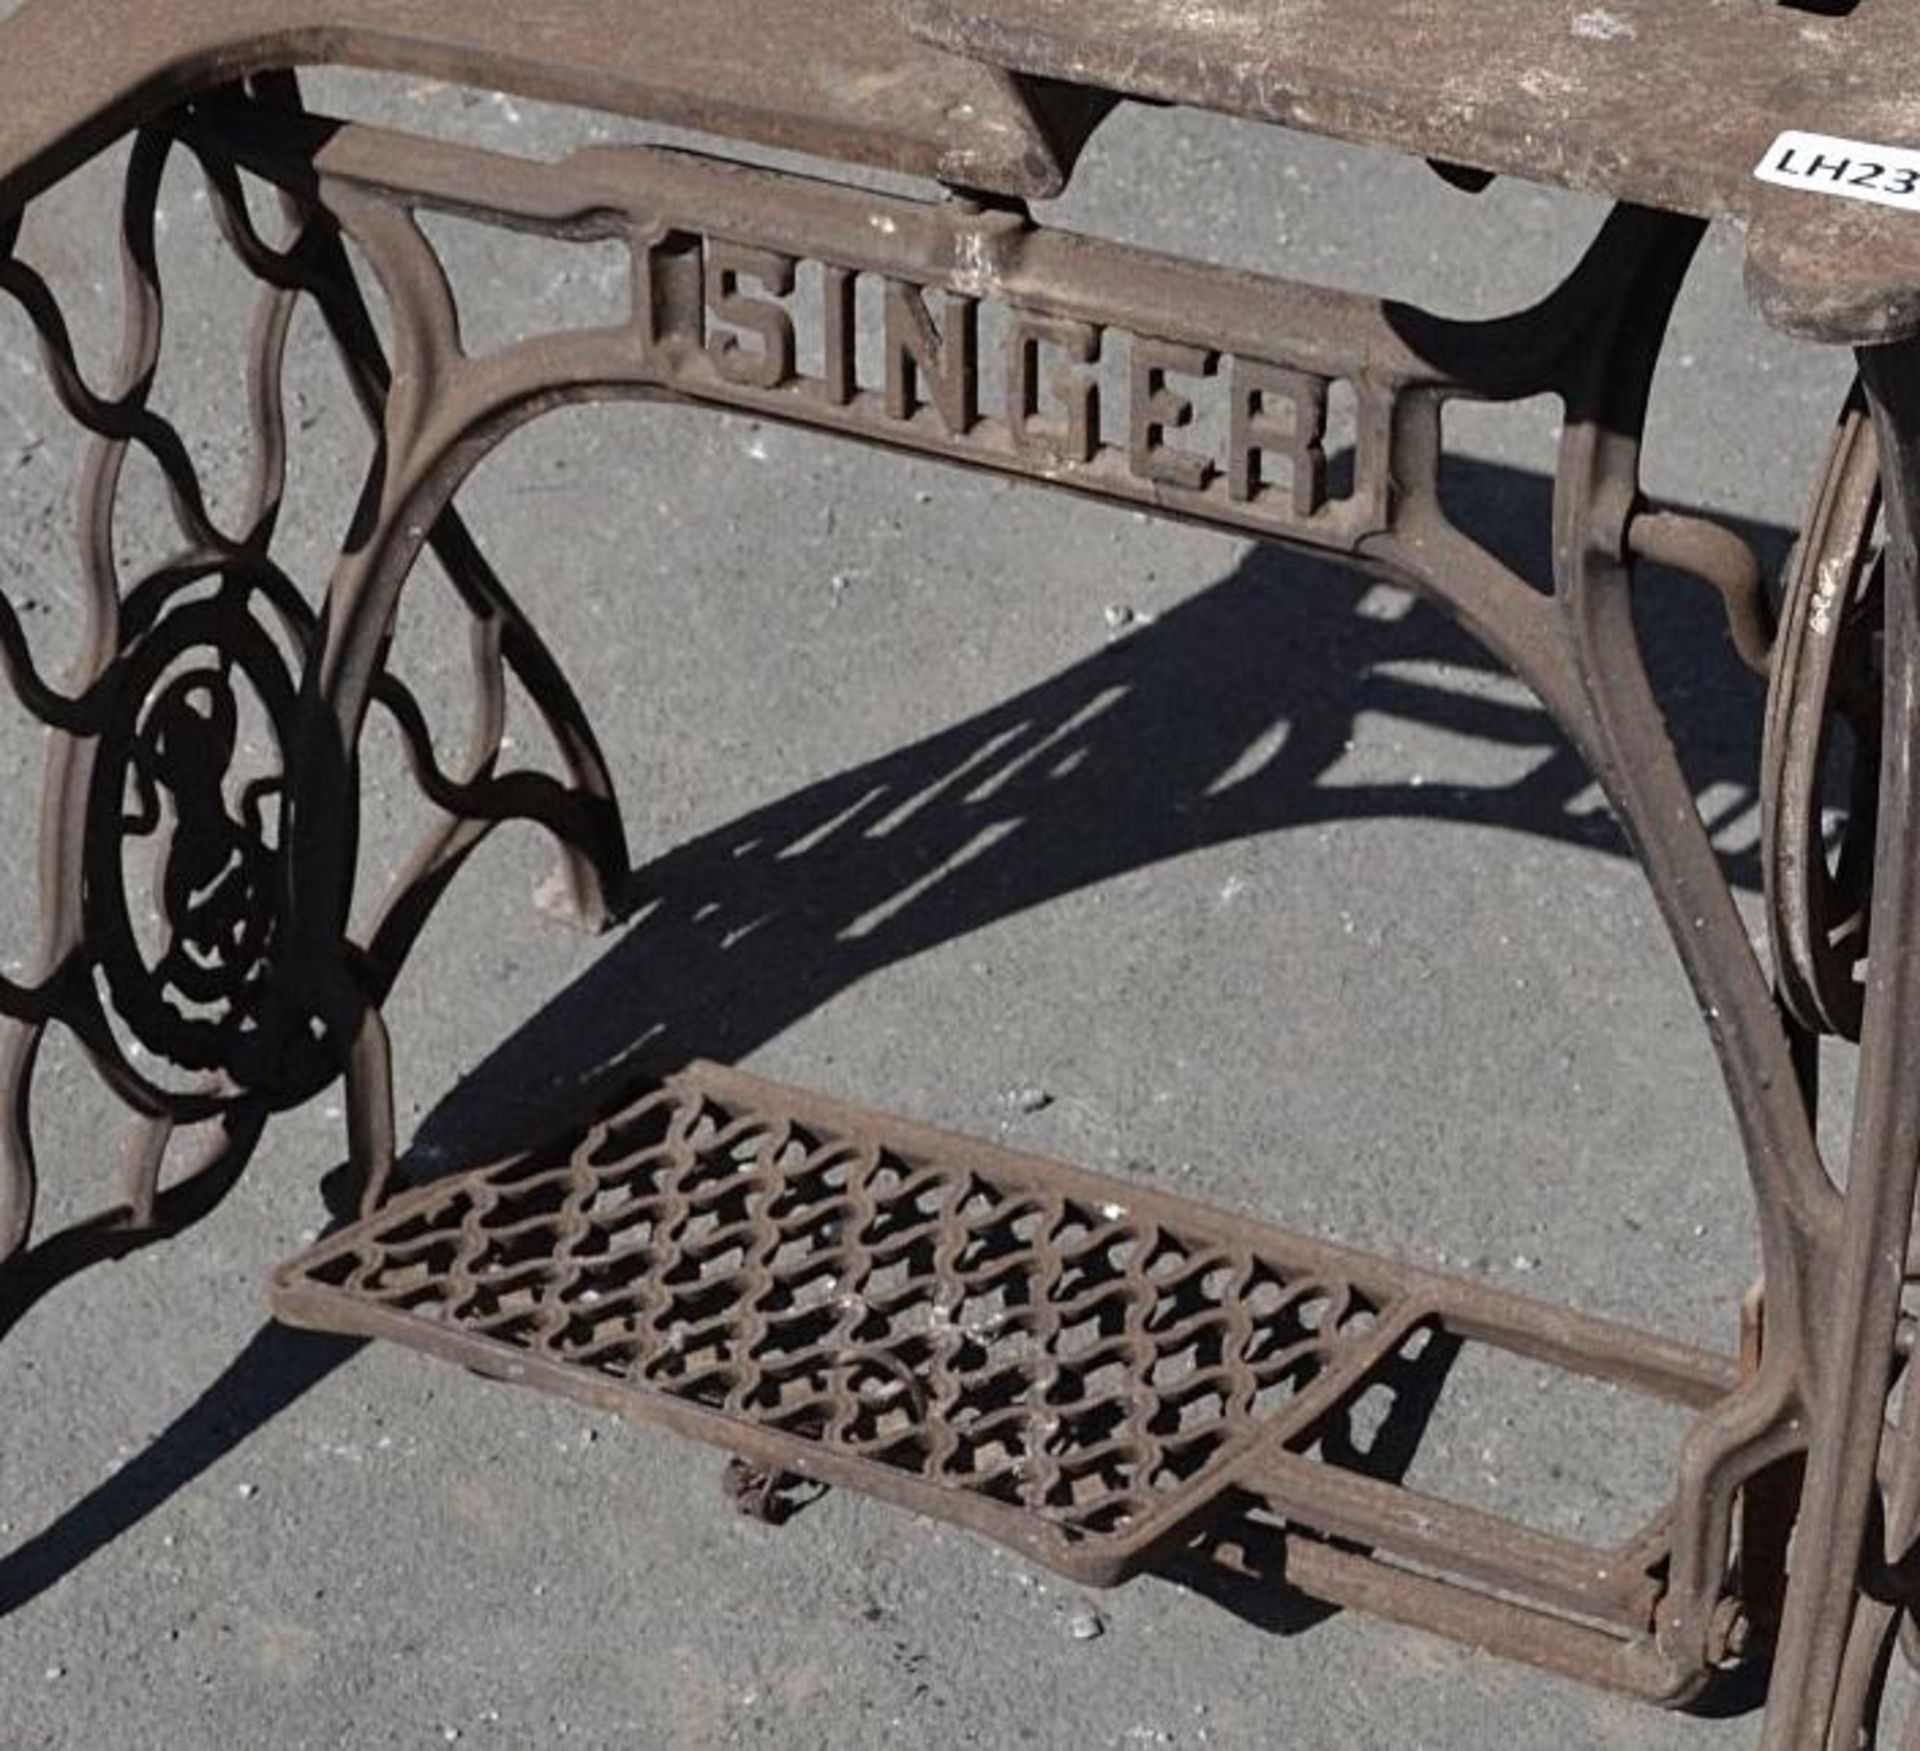 1 x Antique SINGER Cast Iron Sewing Machine Treadle Base - Good Display Piece, Recently Removed From - Image 3 of 3